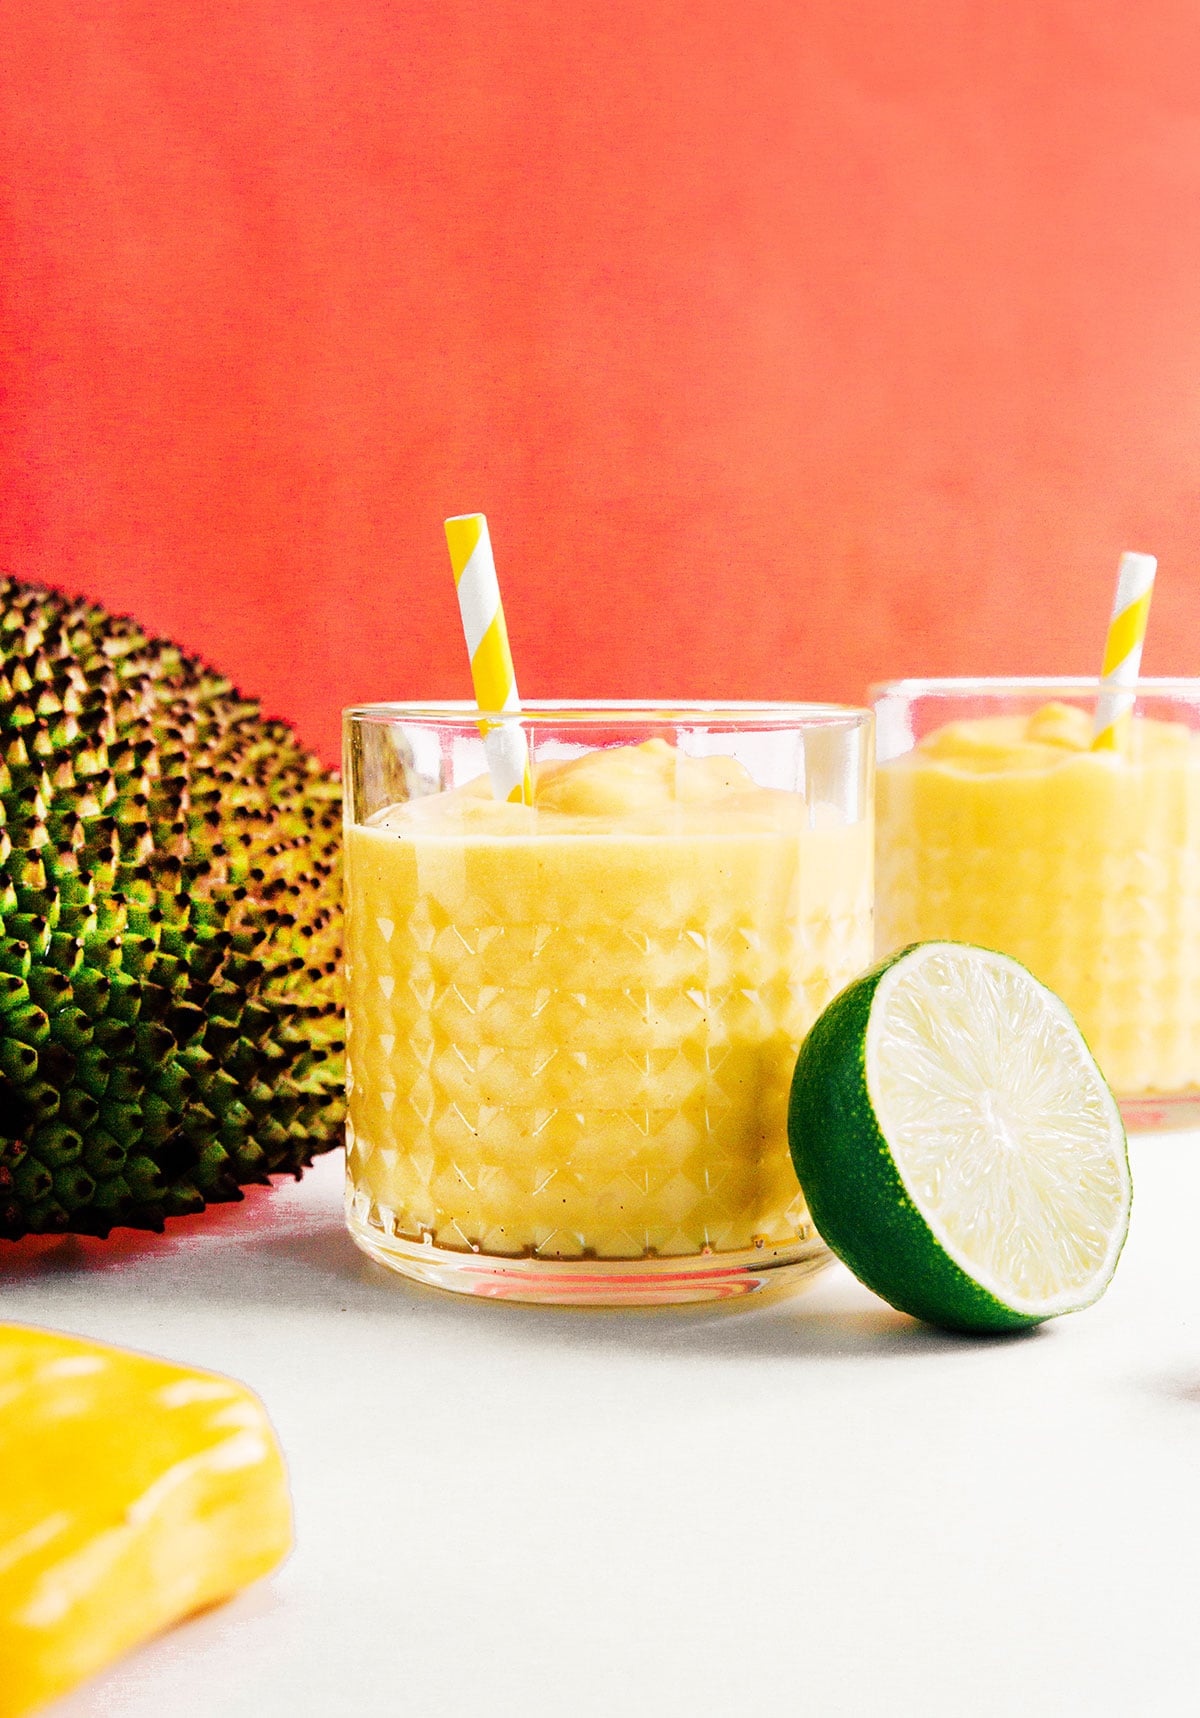 Two rocks glasses filled with jackfruit smoothies and yellow striped straws.